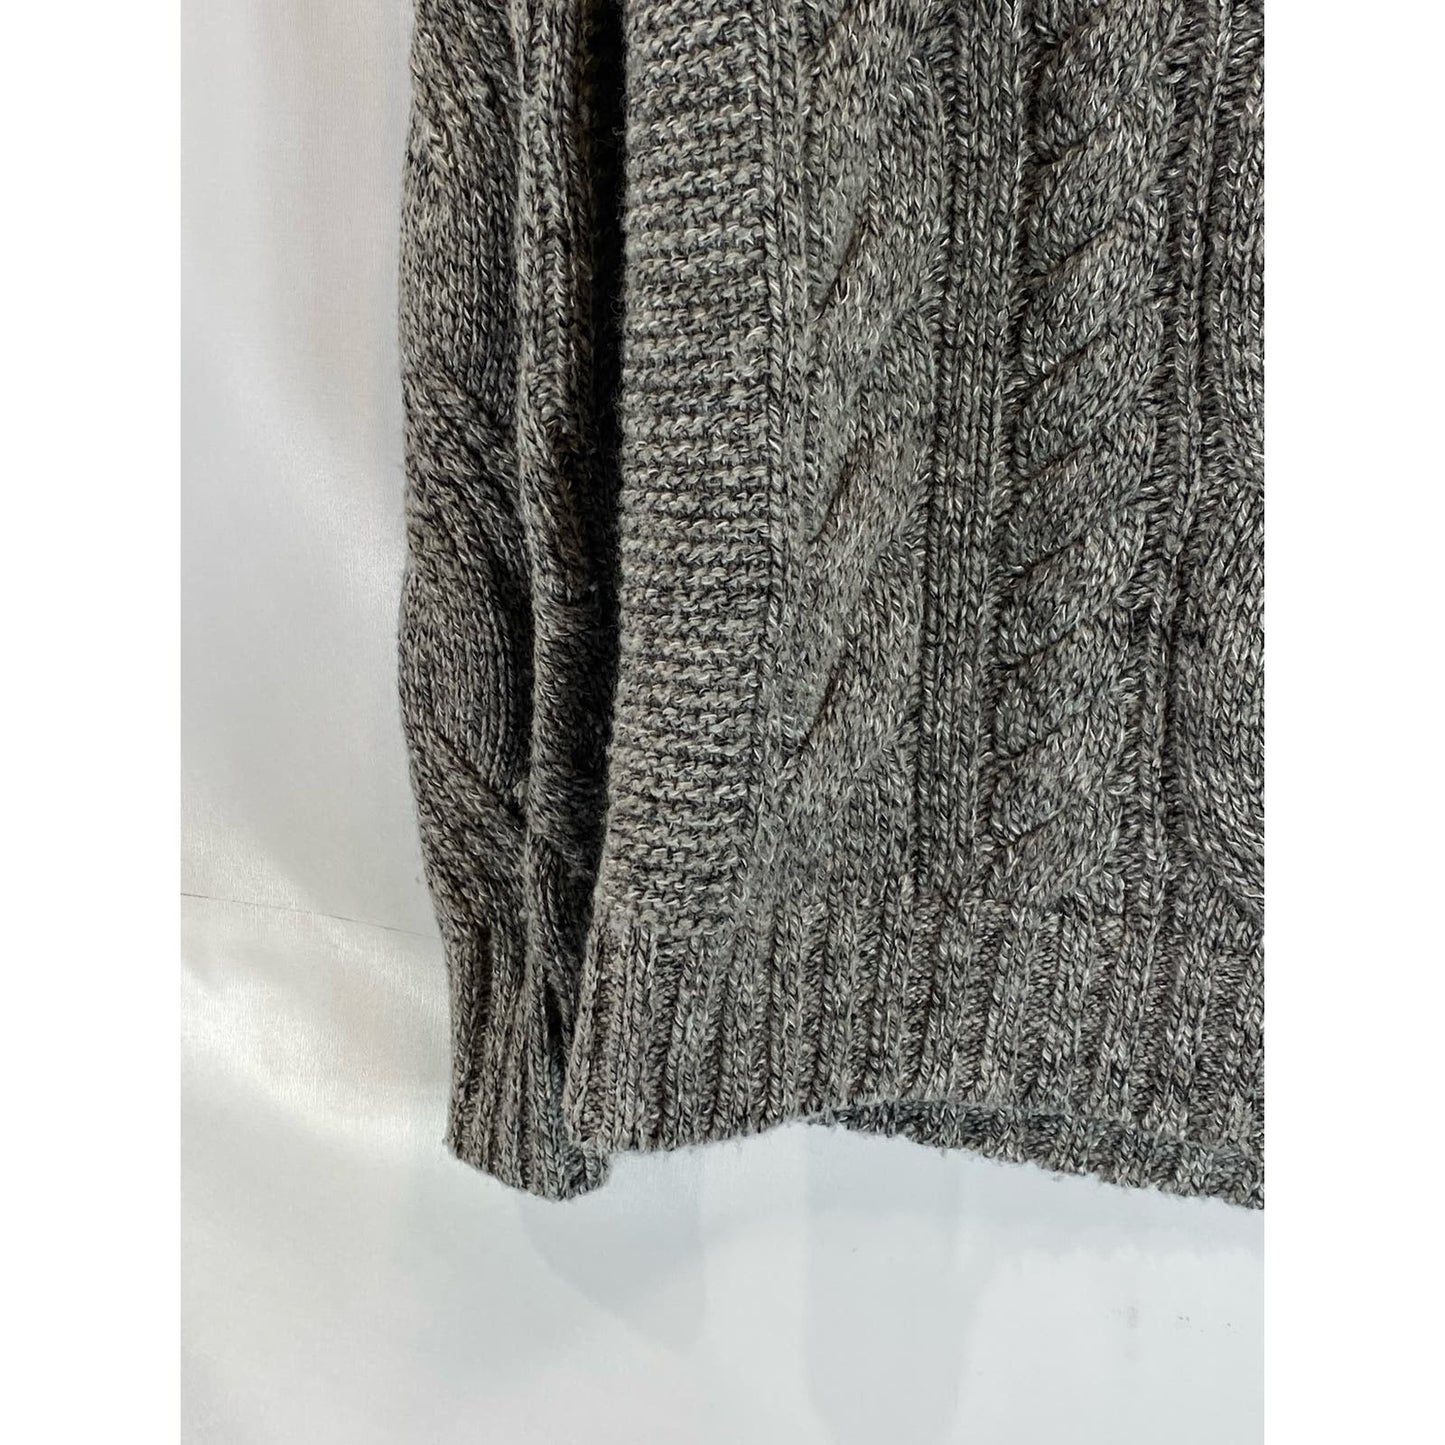 BANANA REPUBLIC Men's Gray Mock-Neck Cable Grown Knit Pullover Sweater SZ M